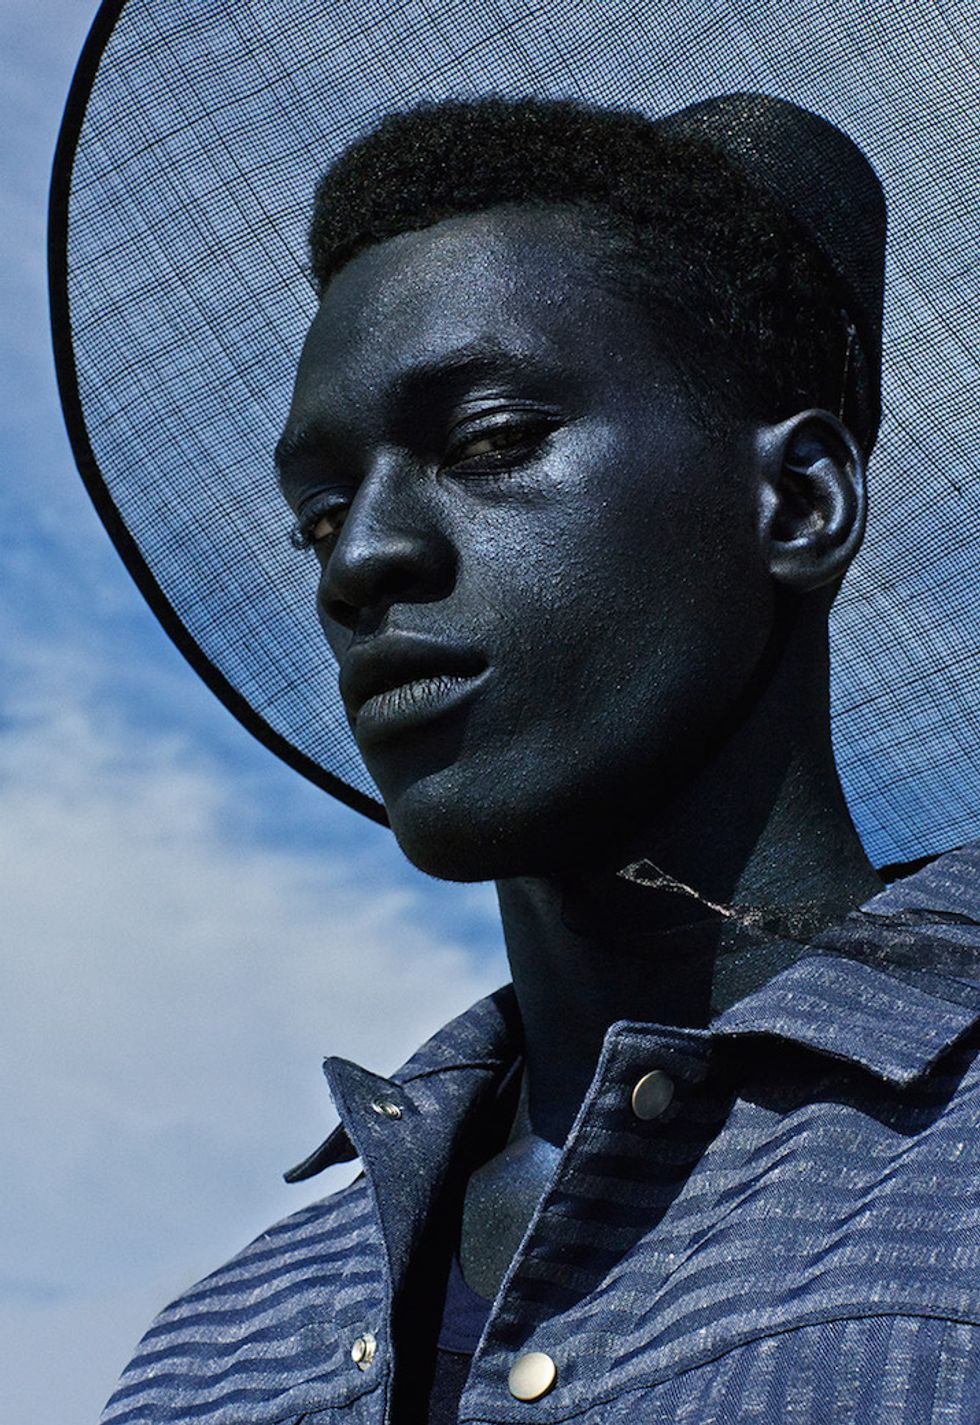 Young South African Designer Lukhanyo Mdingi's New Lookbook Is Stunning